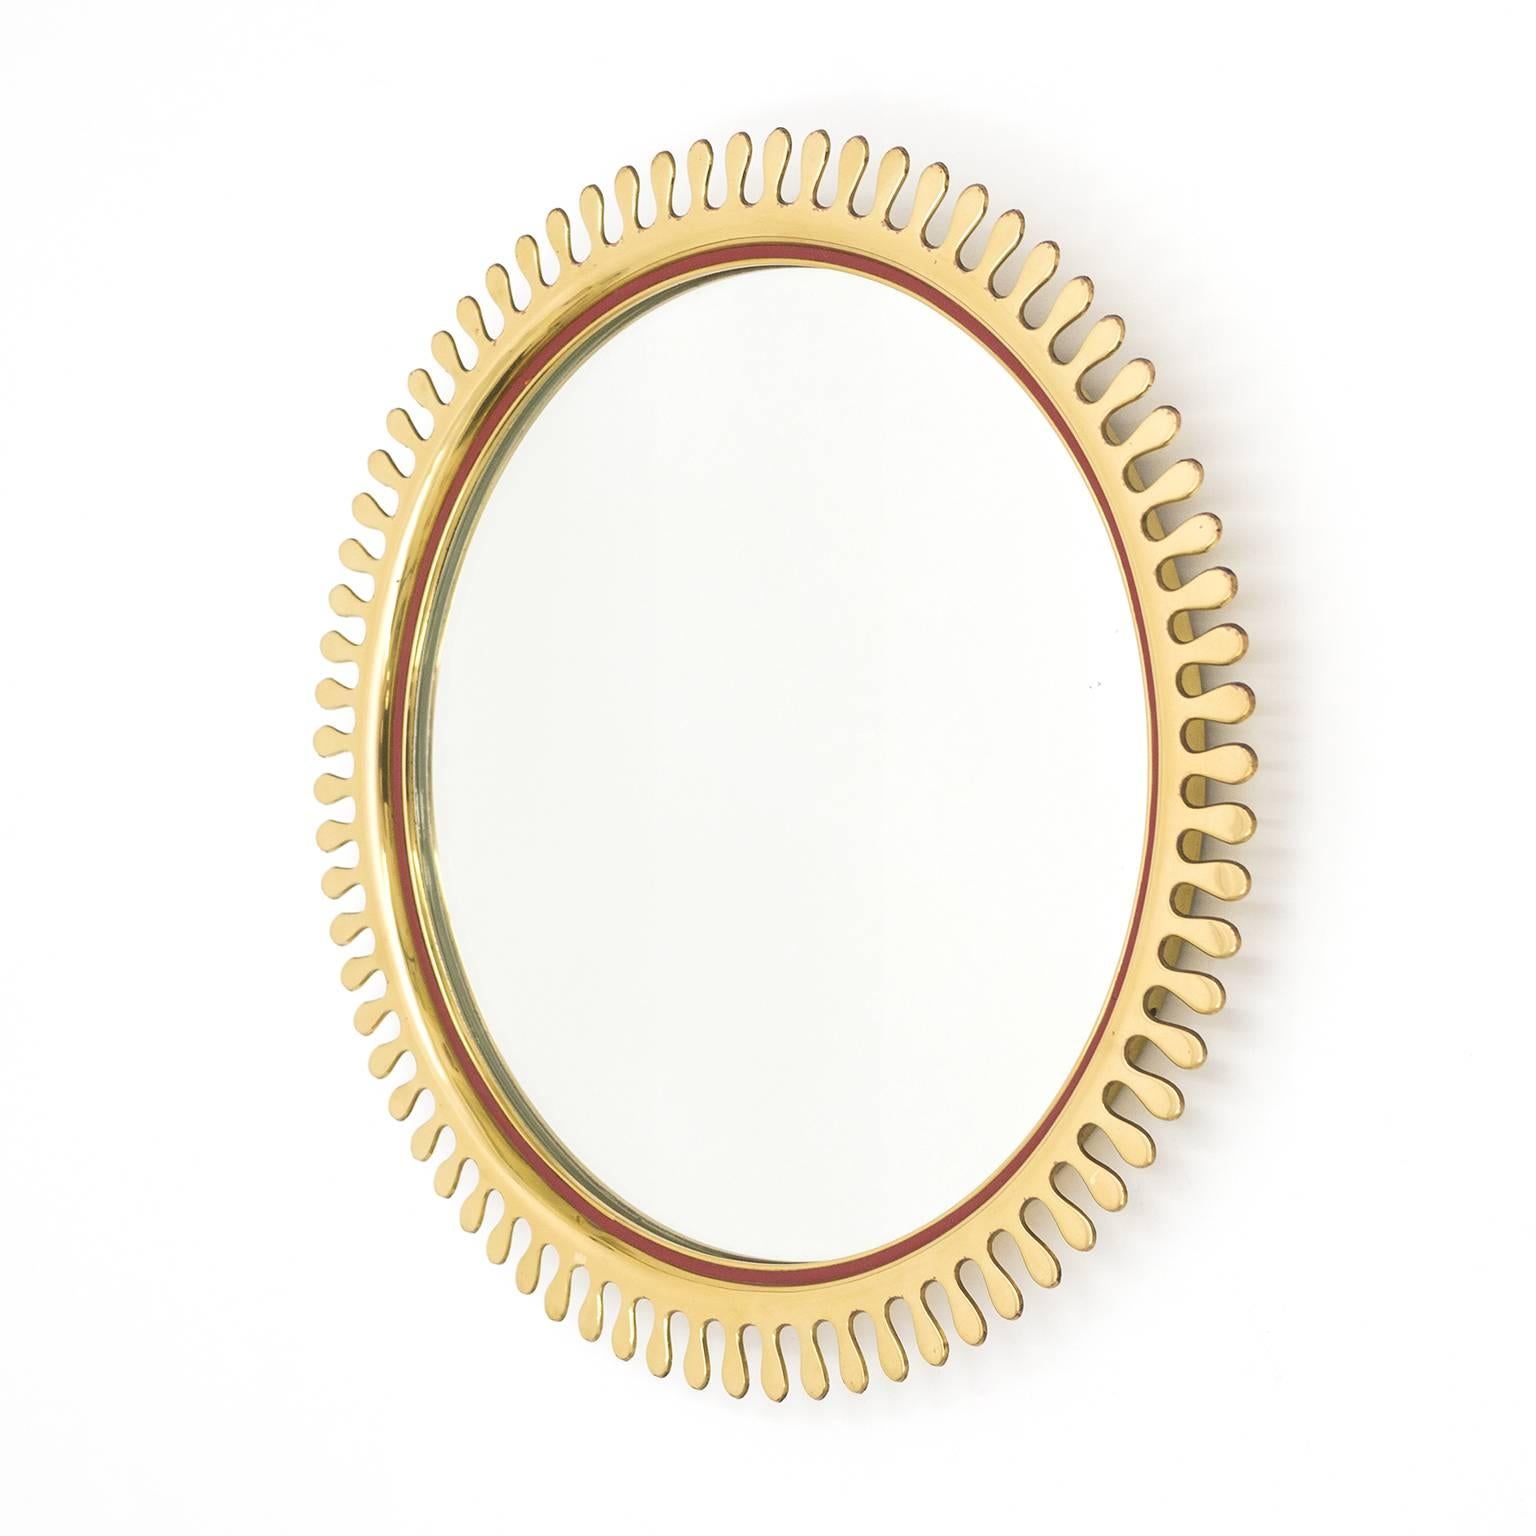 Beautifully crafted Mid-Century brass sun mirror. Made of thick, solid brass this represents a very unique take on the sunburst motif. Along the inside of the rim is a slim bordeaux colored leather or faux-leather band. Beautiful original condition